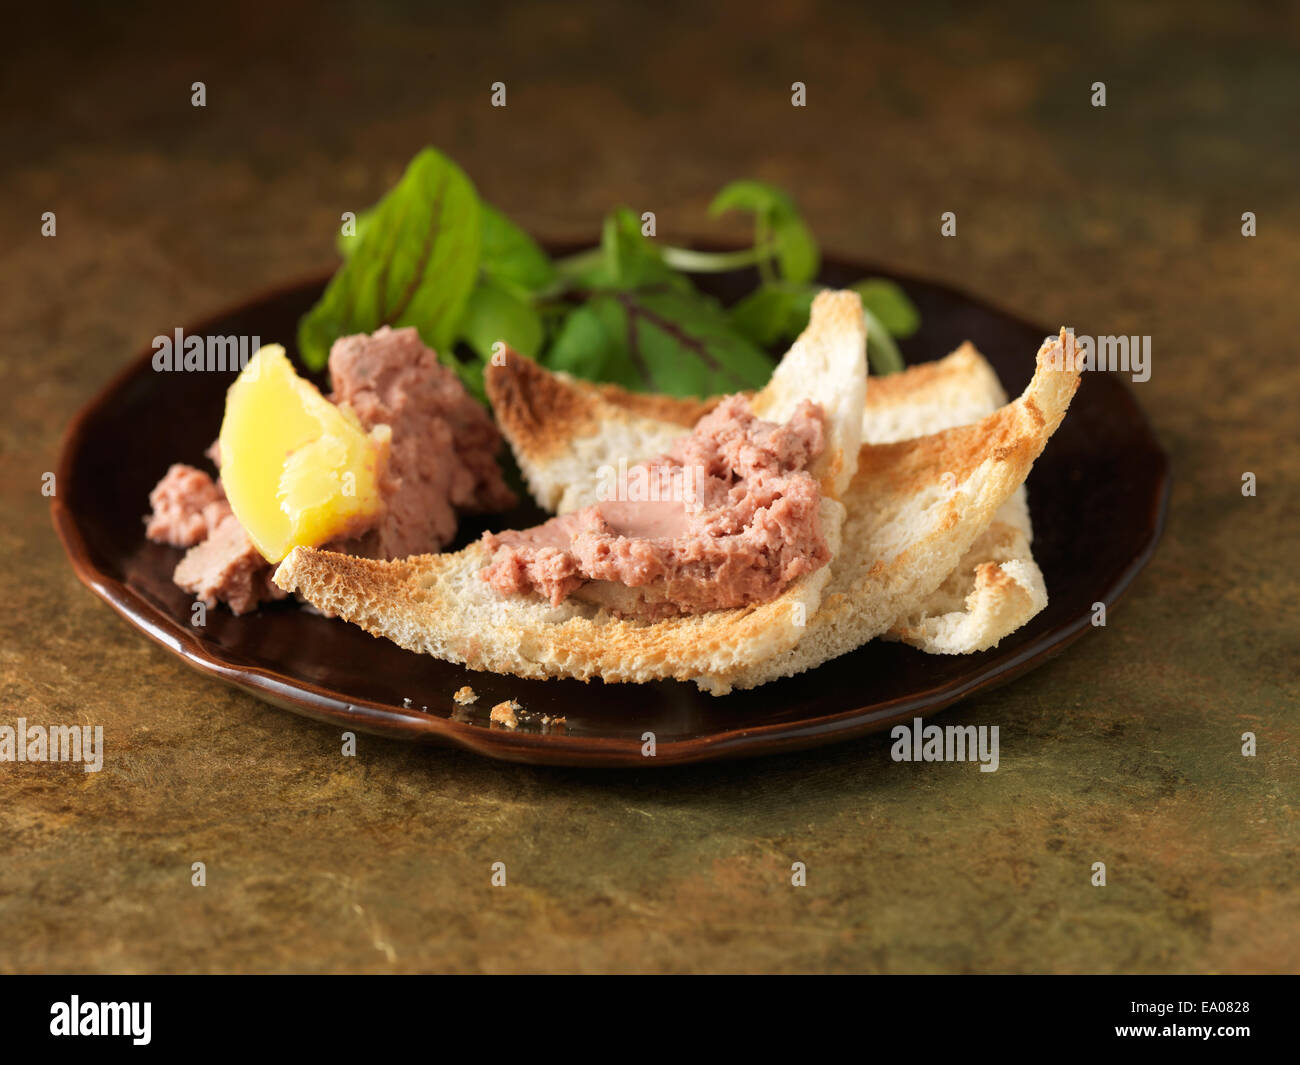 Christmas snack of chicken liver parfait with calvados. Green salad leaves and white bread toasted crumbs Stock Photo